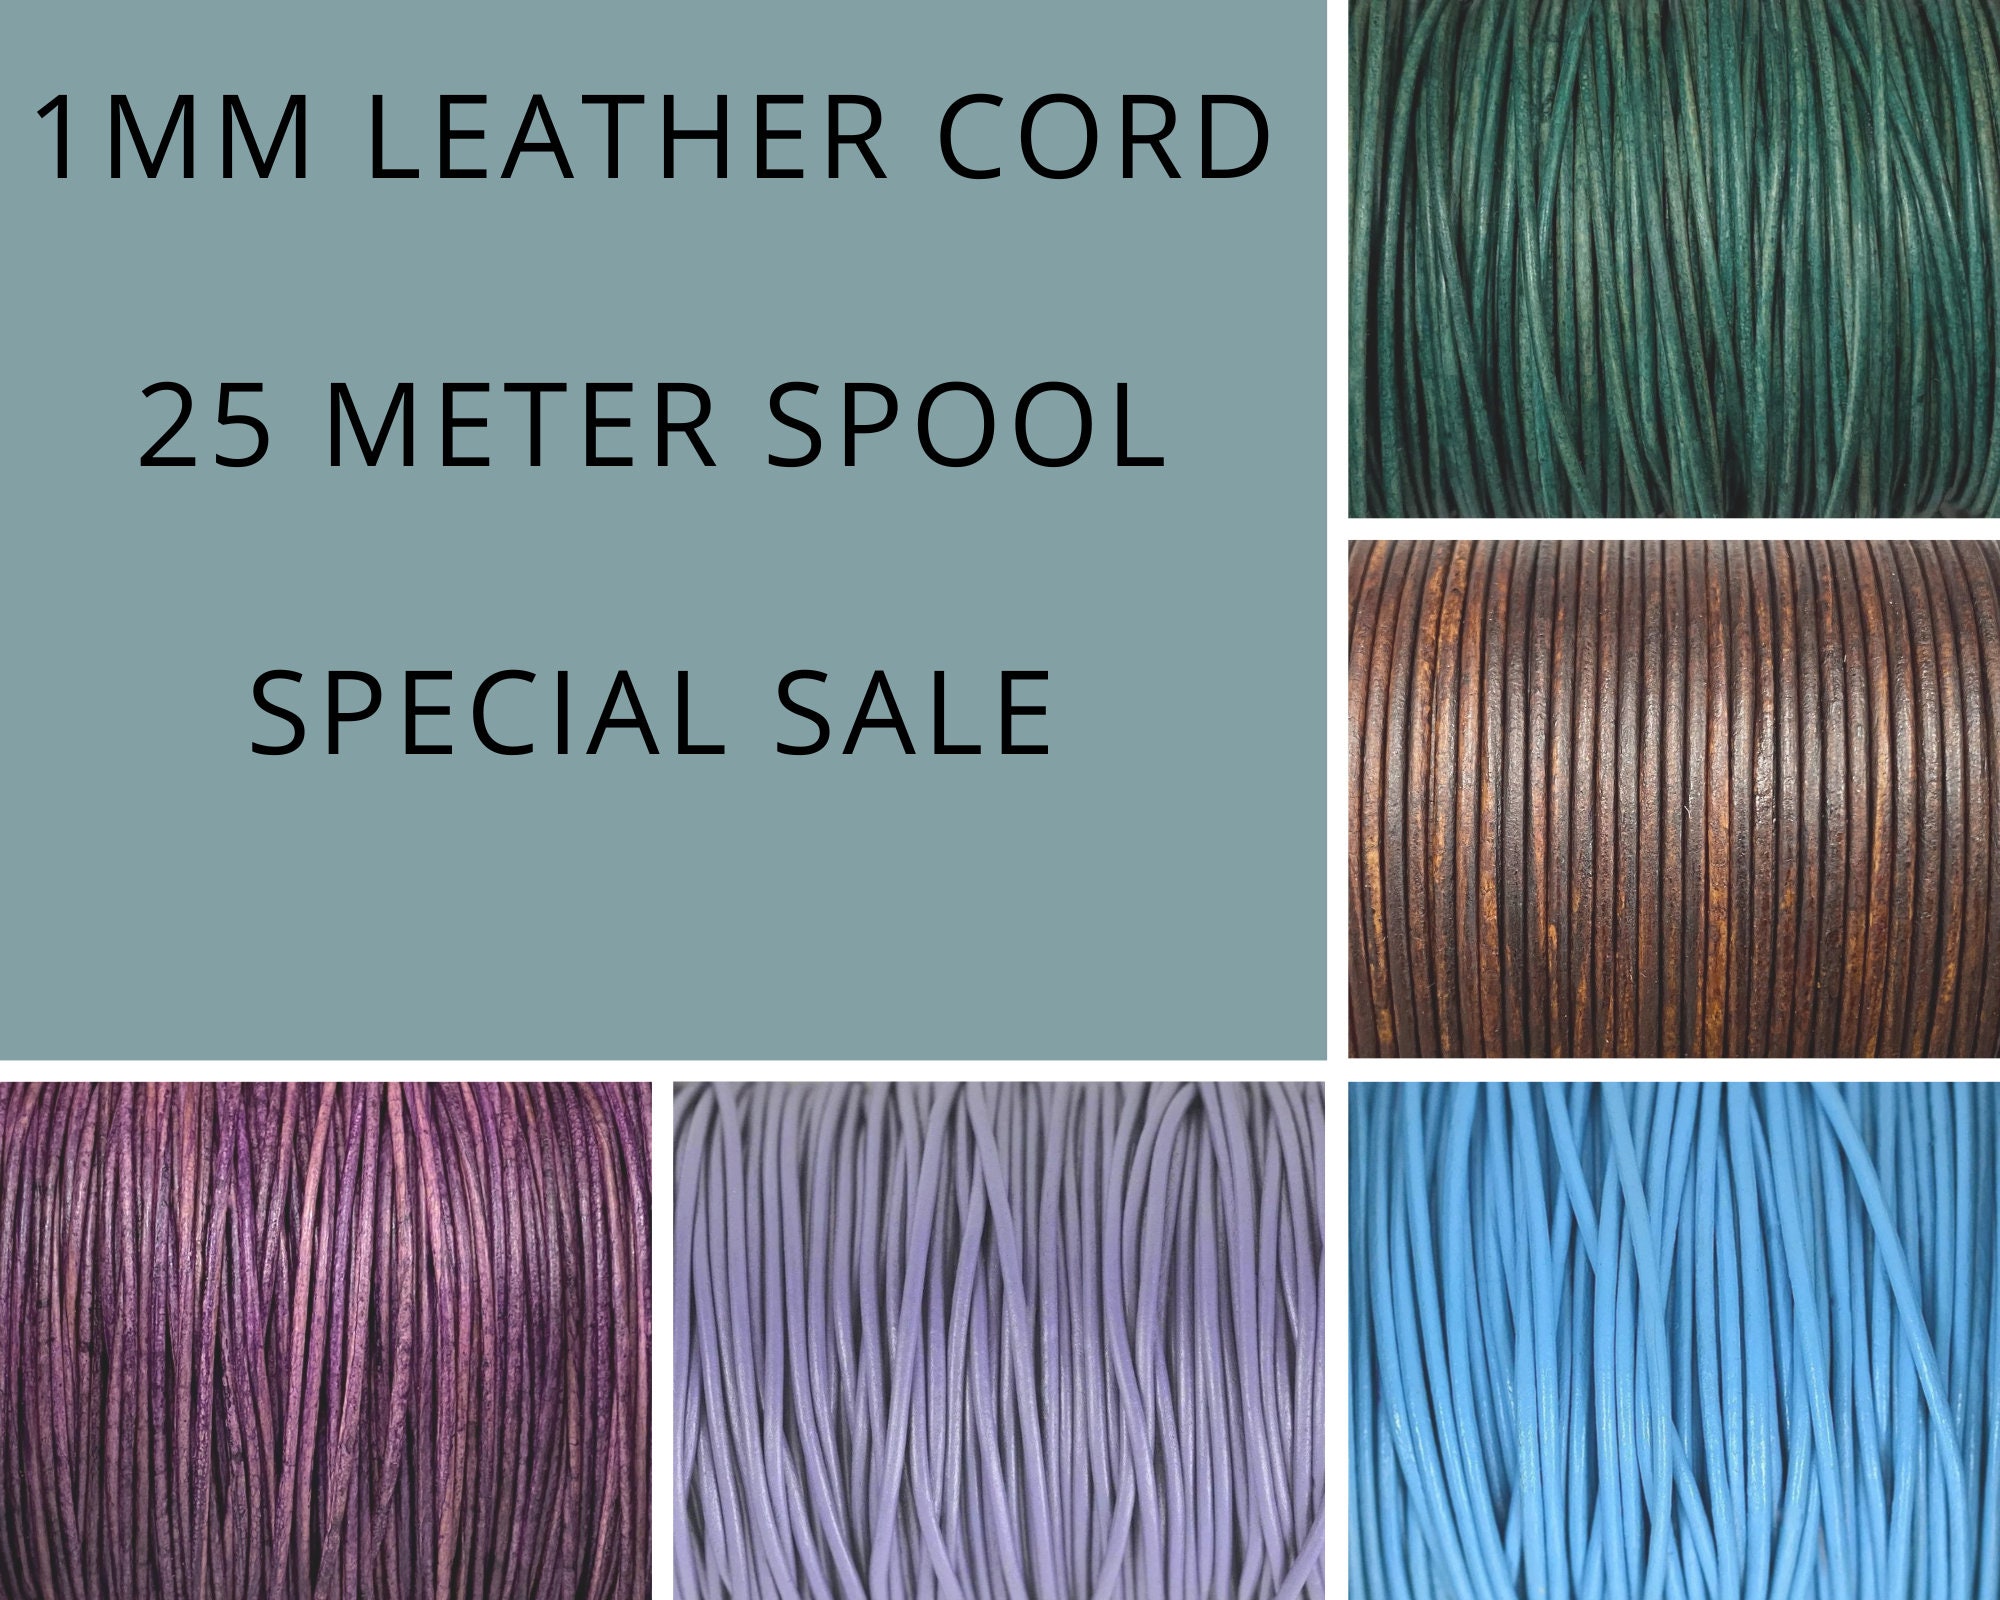 Round Leather Lace - 25 Yard Spool